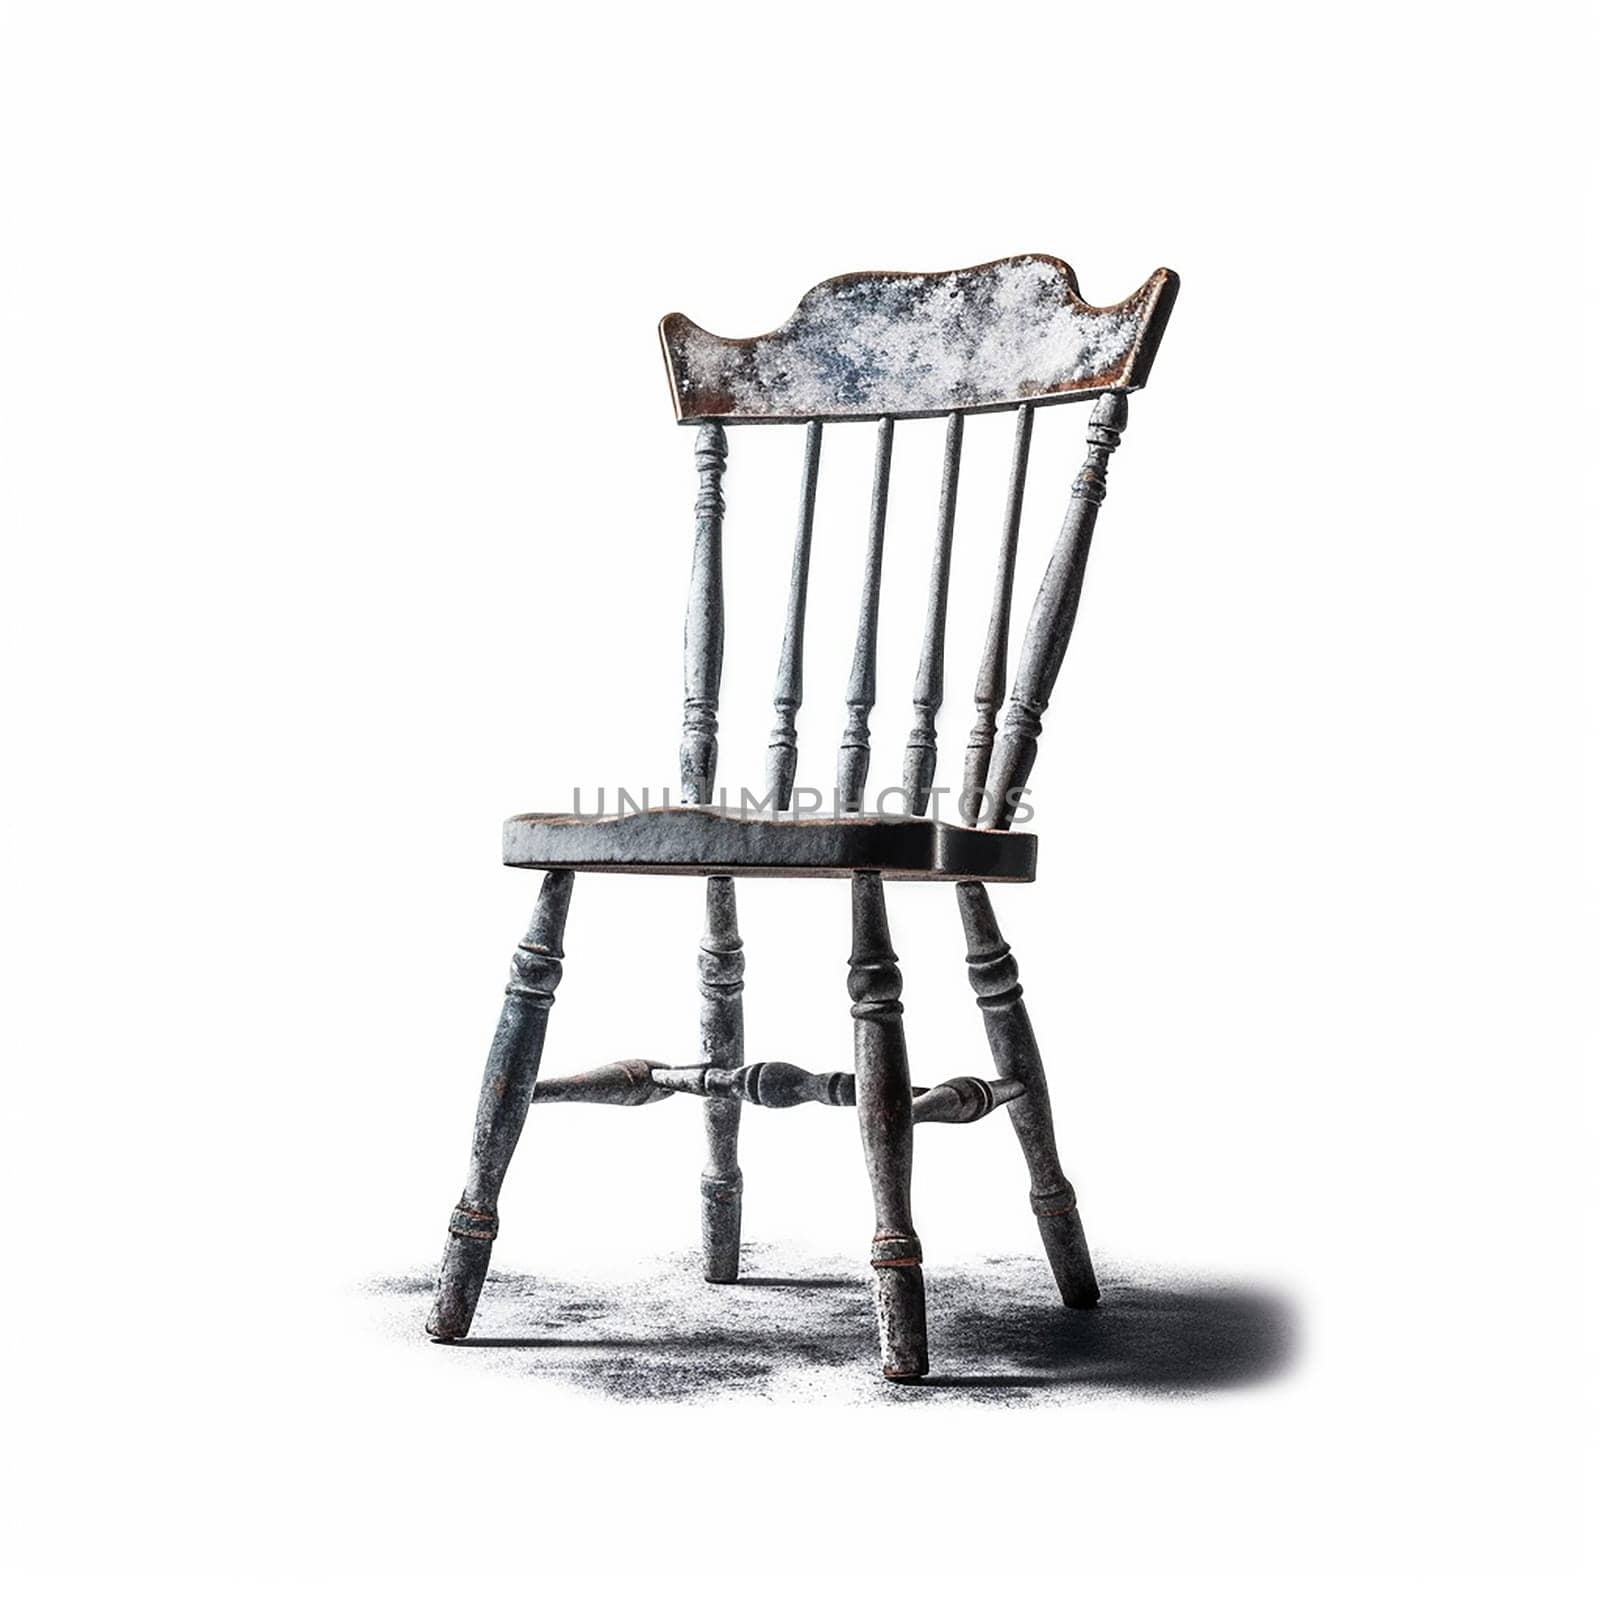 Vintage chair isolated on white background. by Hype2art